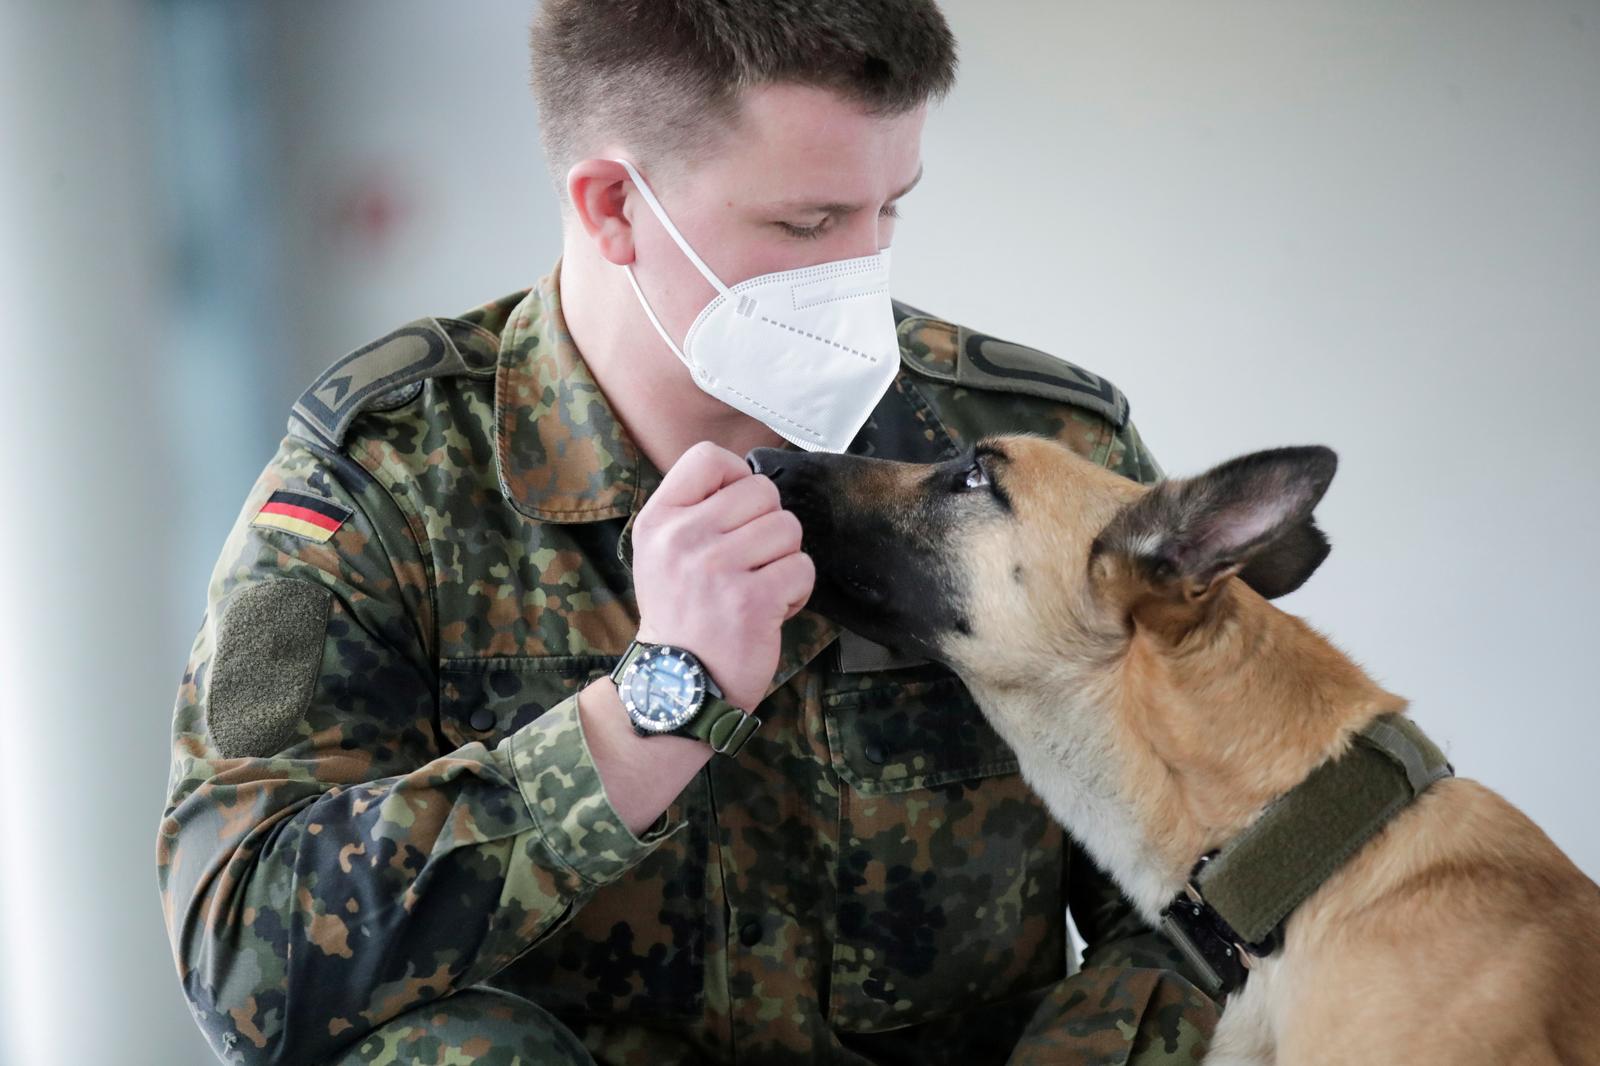 A German veterinary clinic has trained sniffer dogs to detect the novel coronavirus in human saliva samples with 94% accuracy.